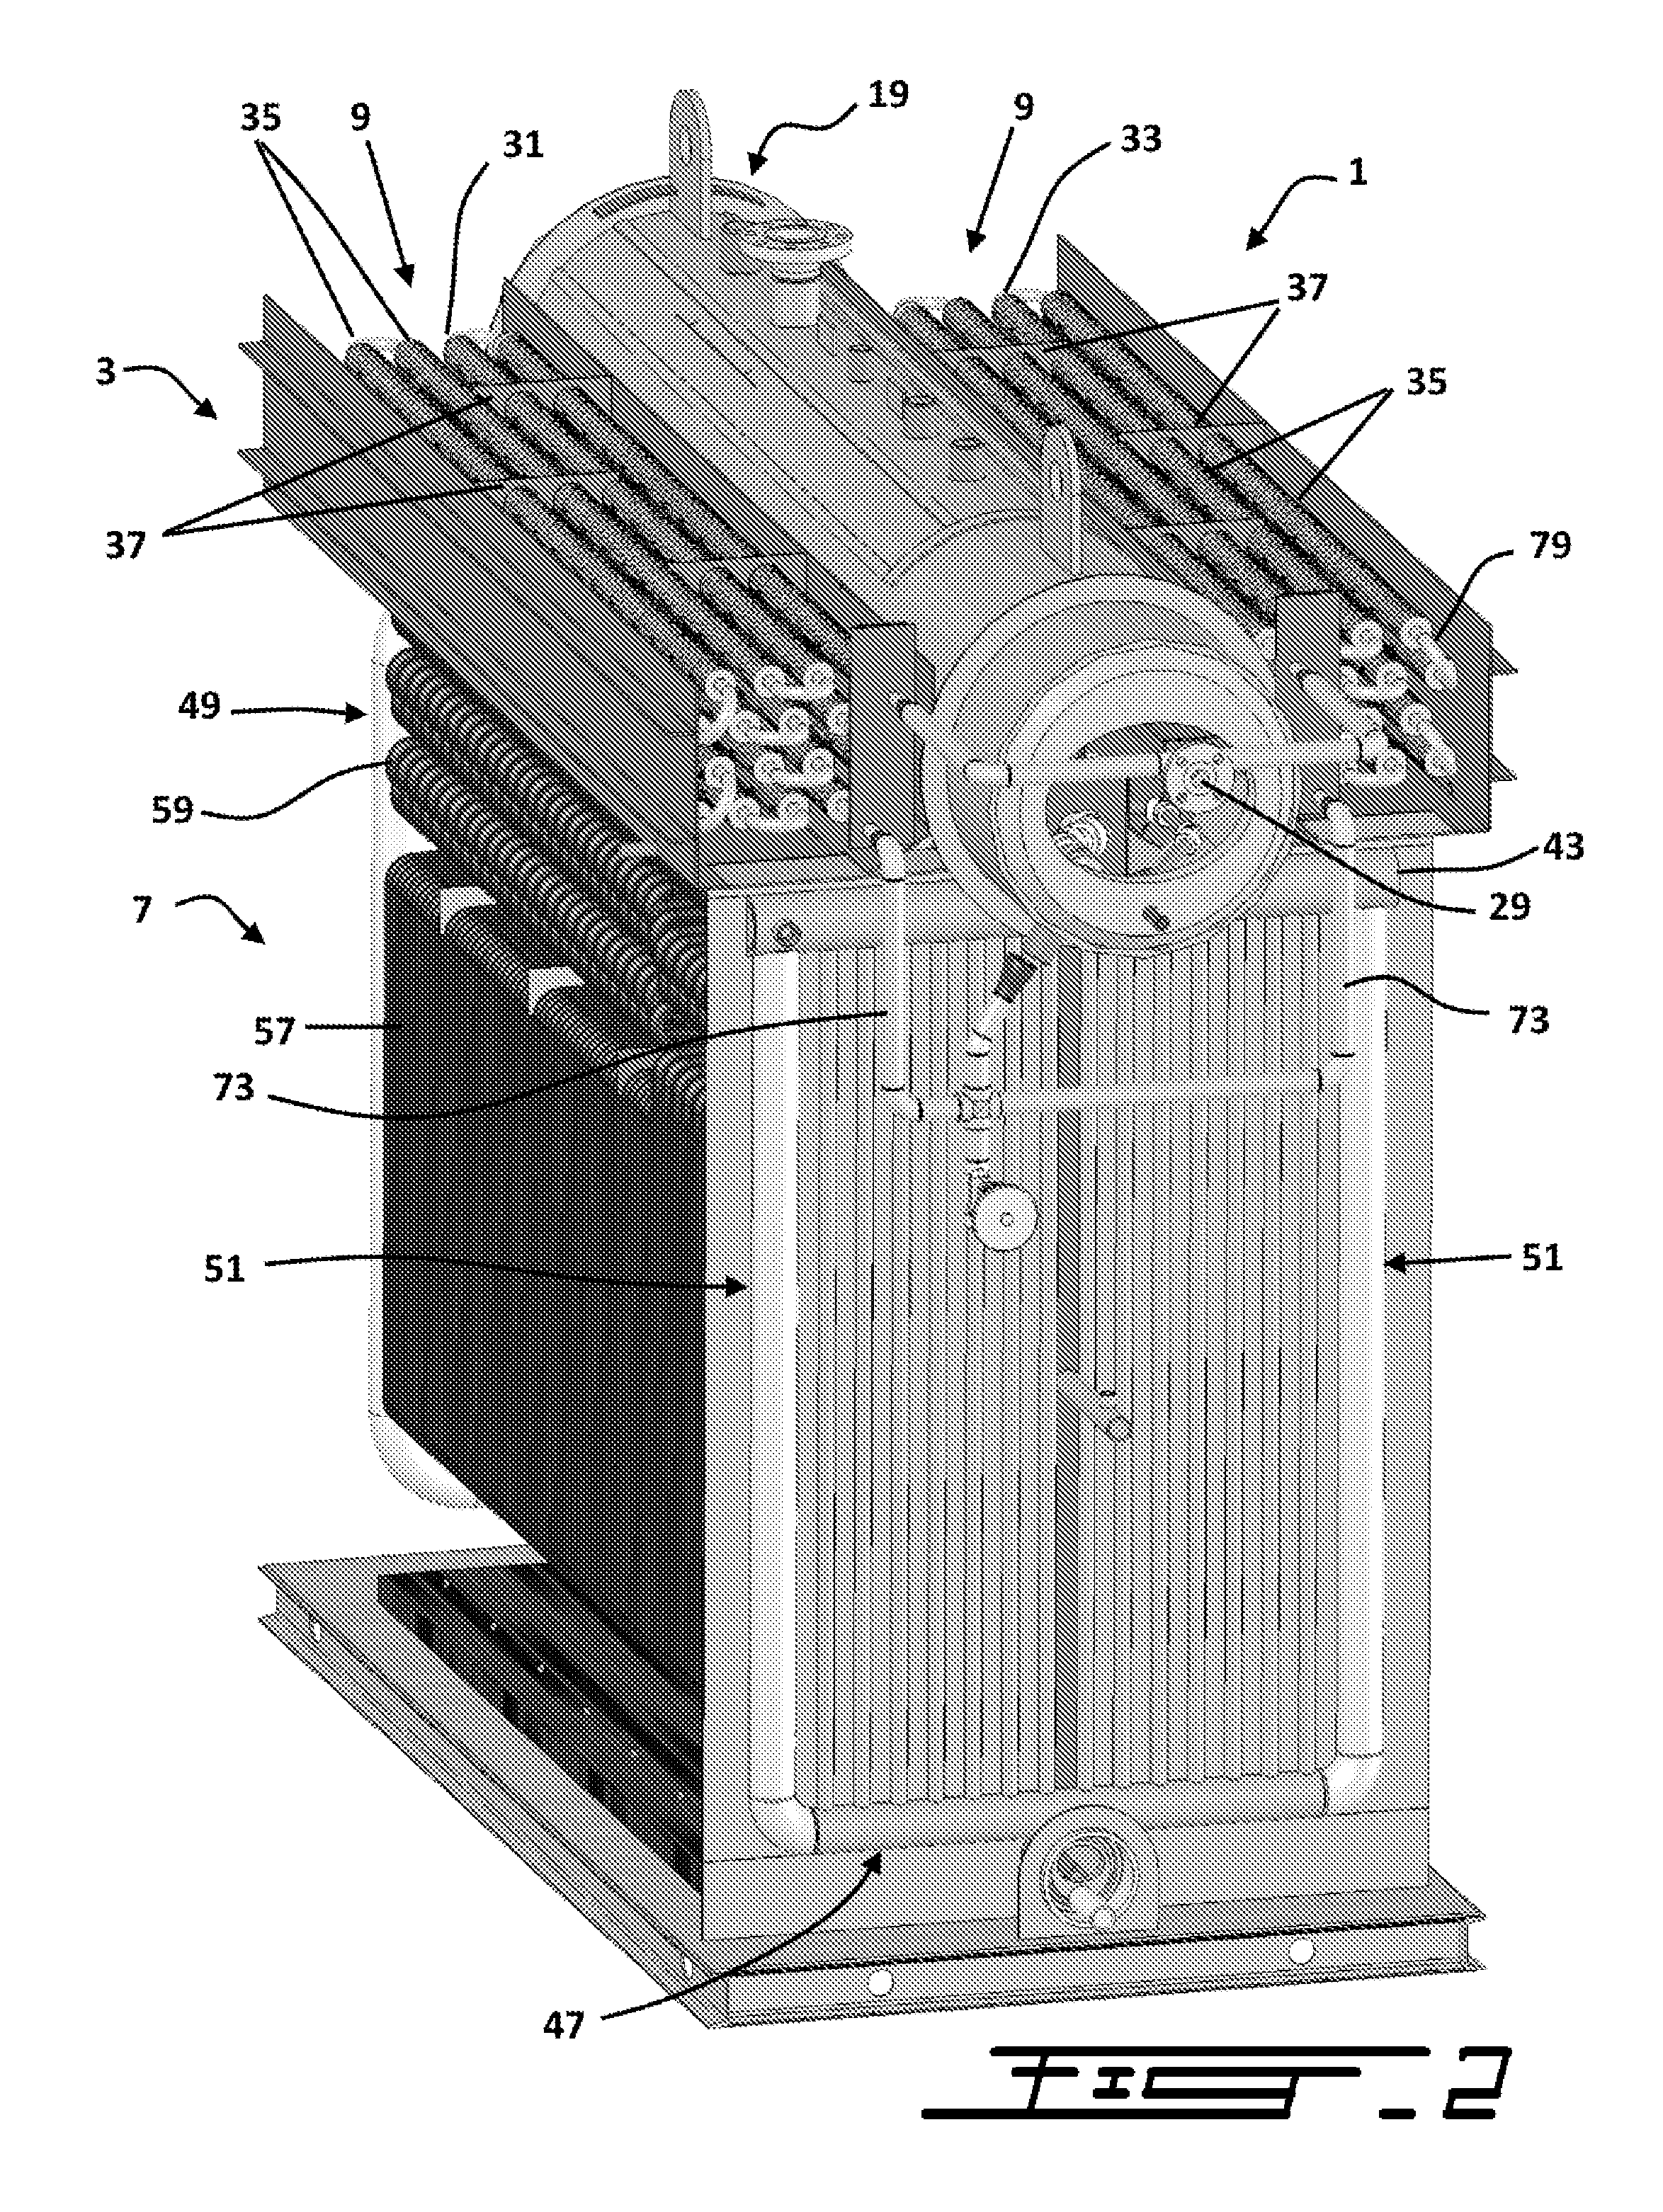 Boiler System Comprising an Integrated Economizer